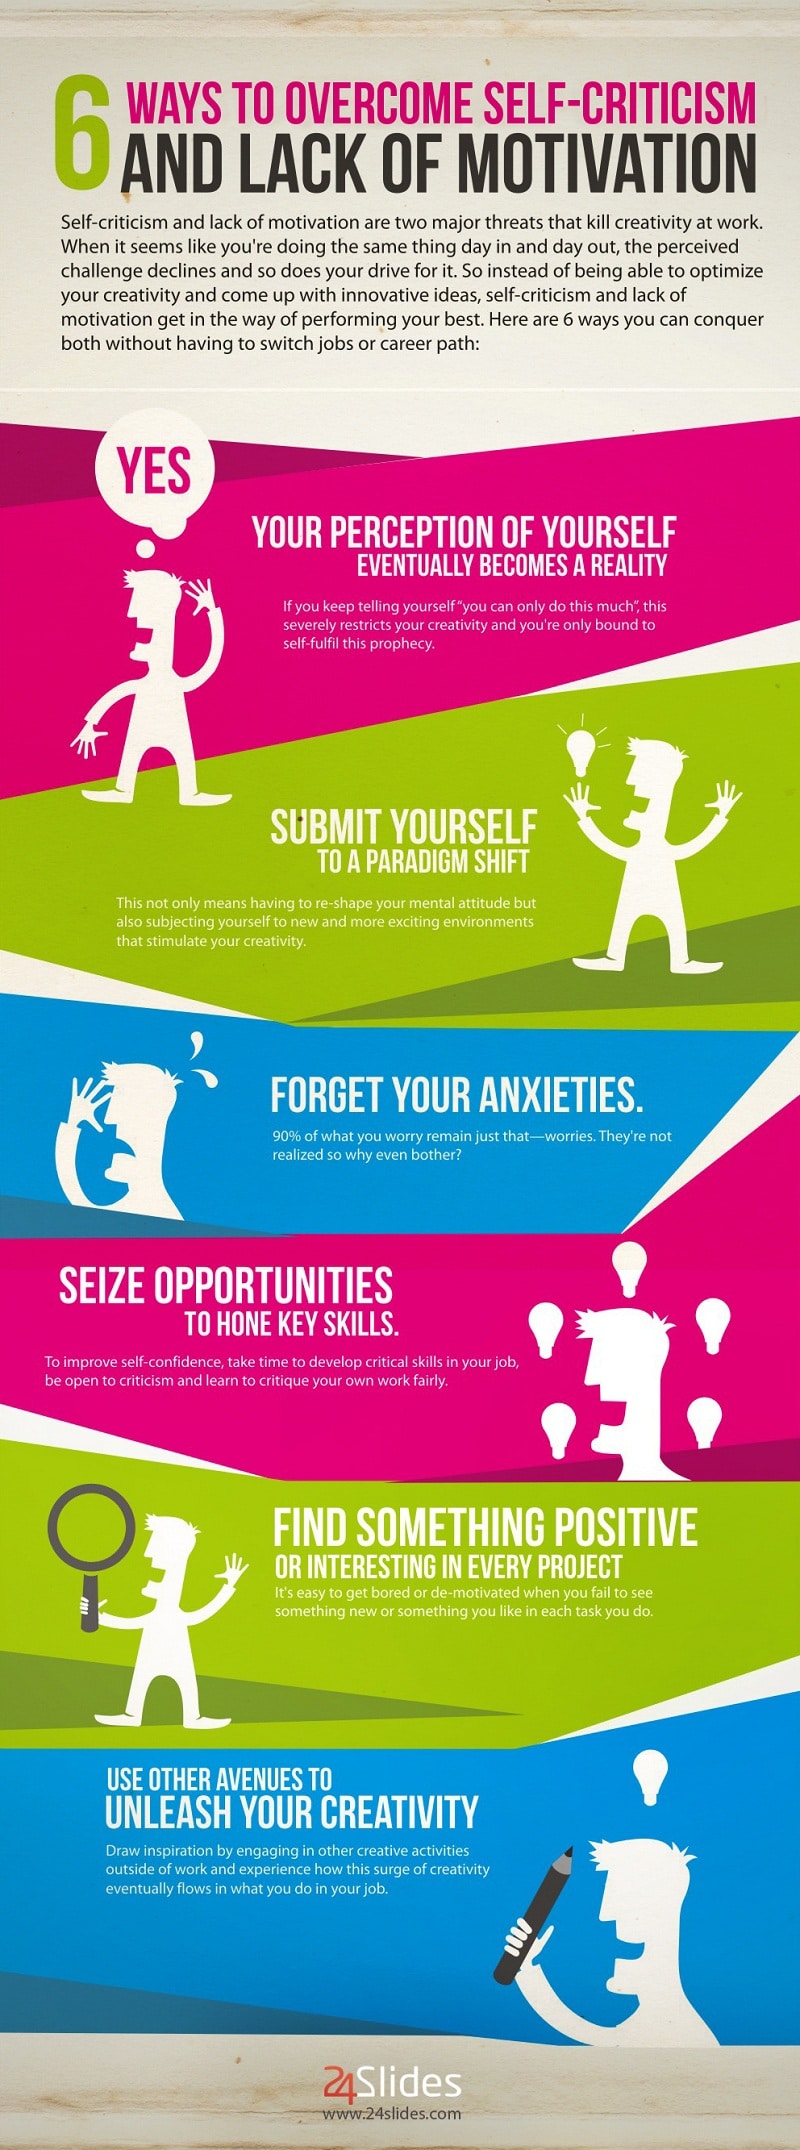 6 Ways To Overcome Self-Criticism & Lack Of Motivation [Infographic]